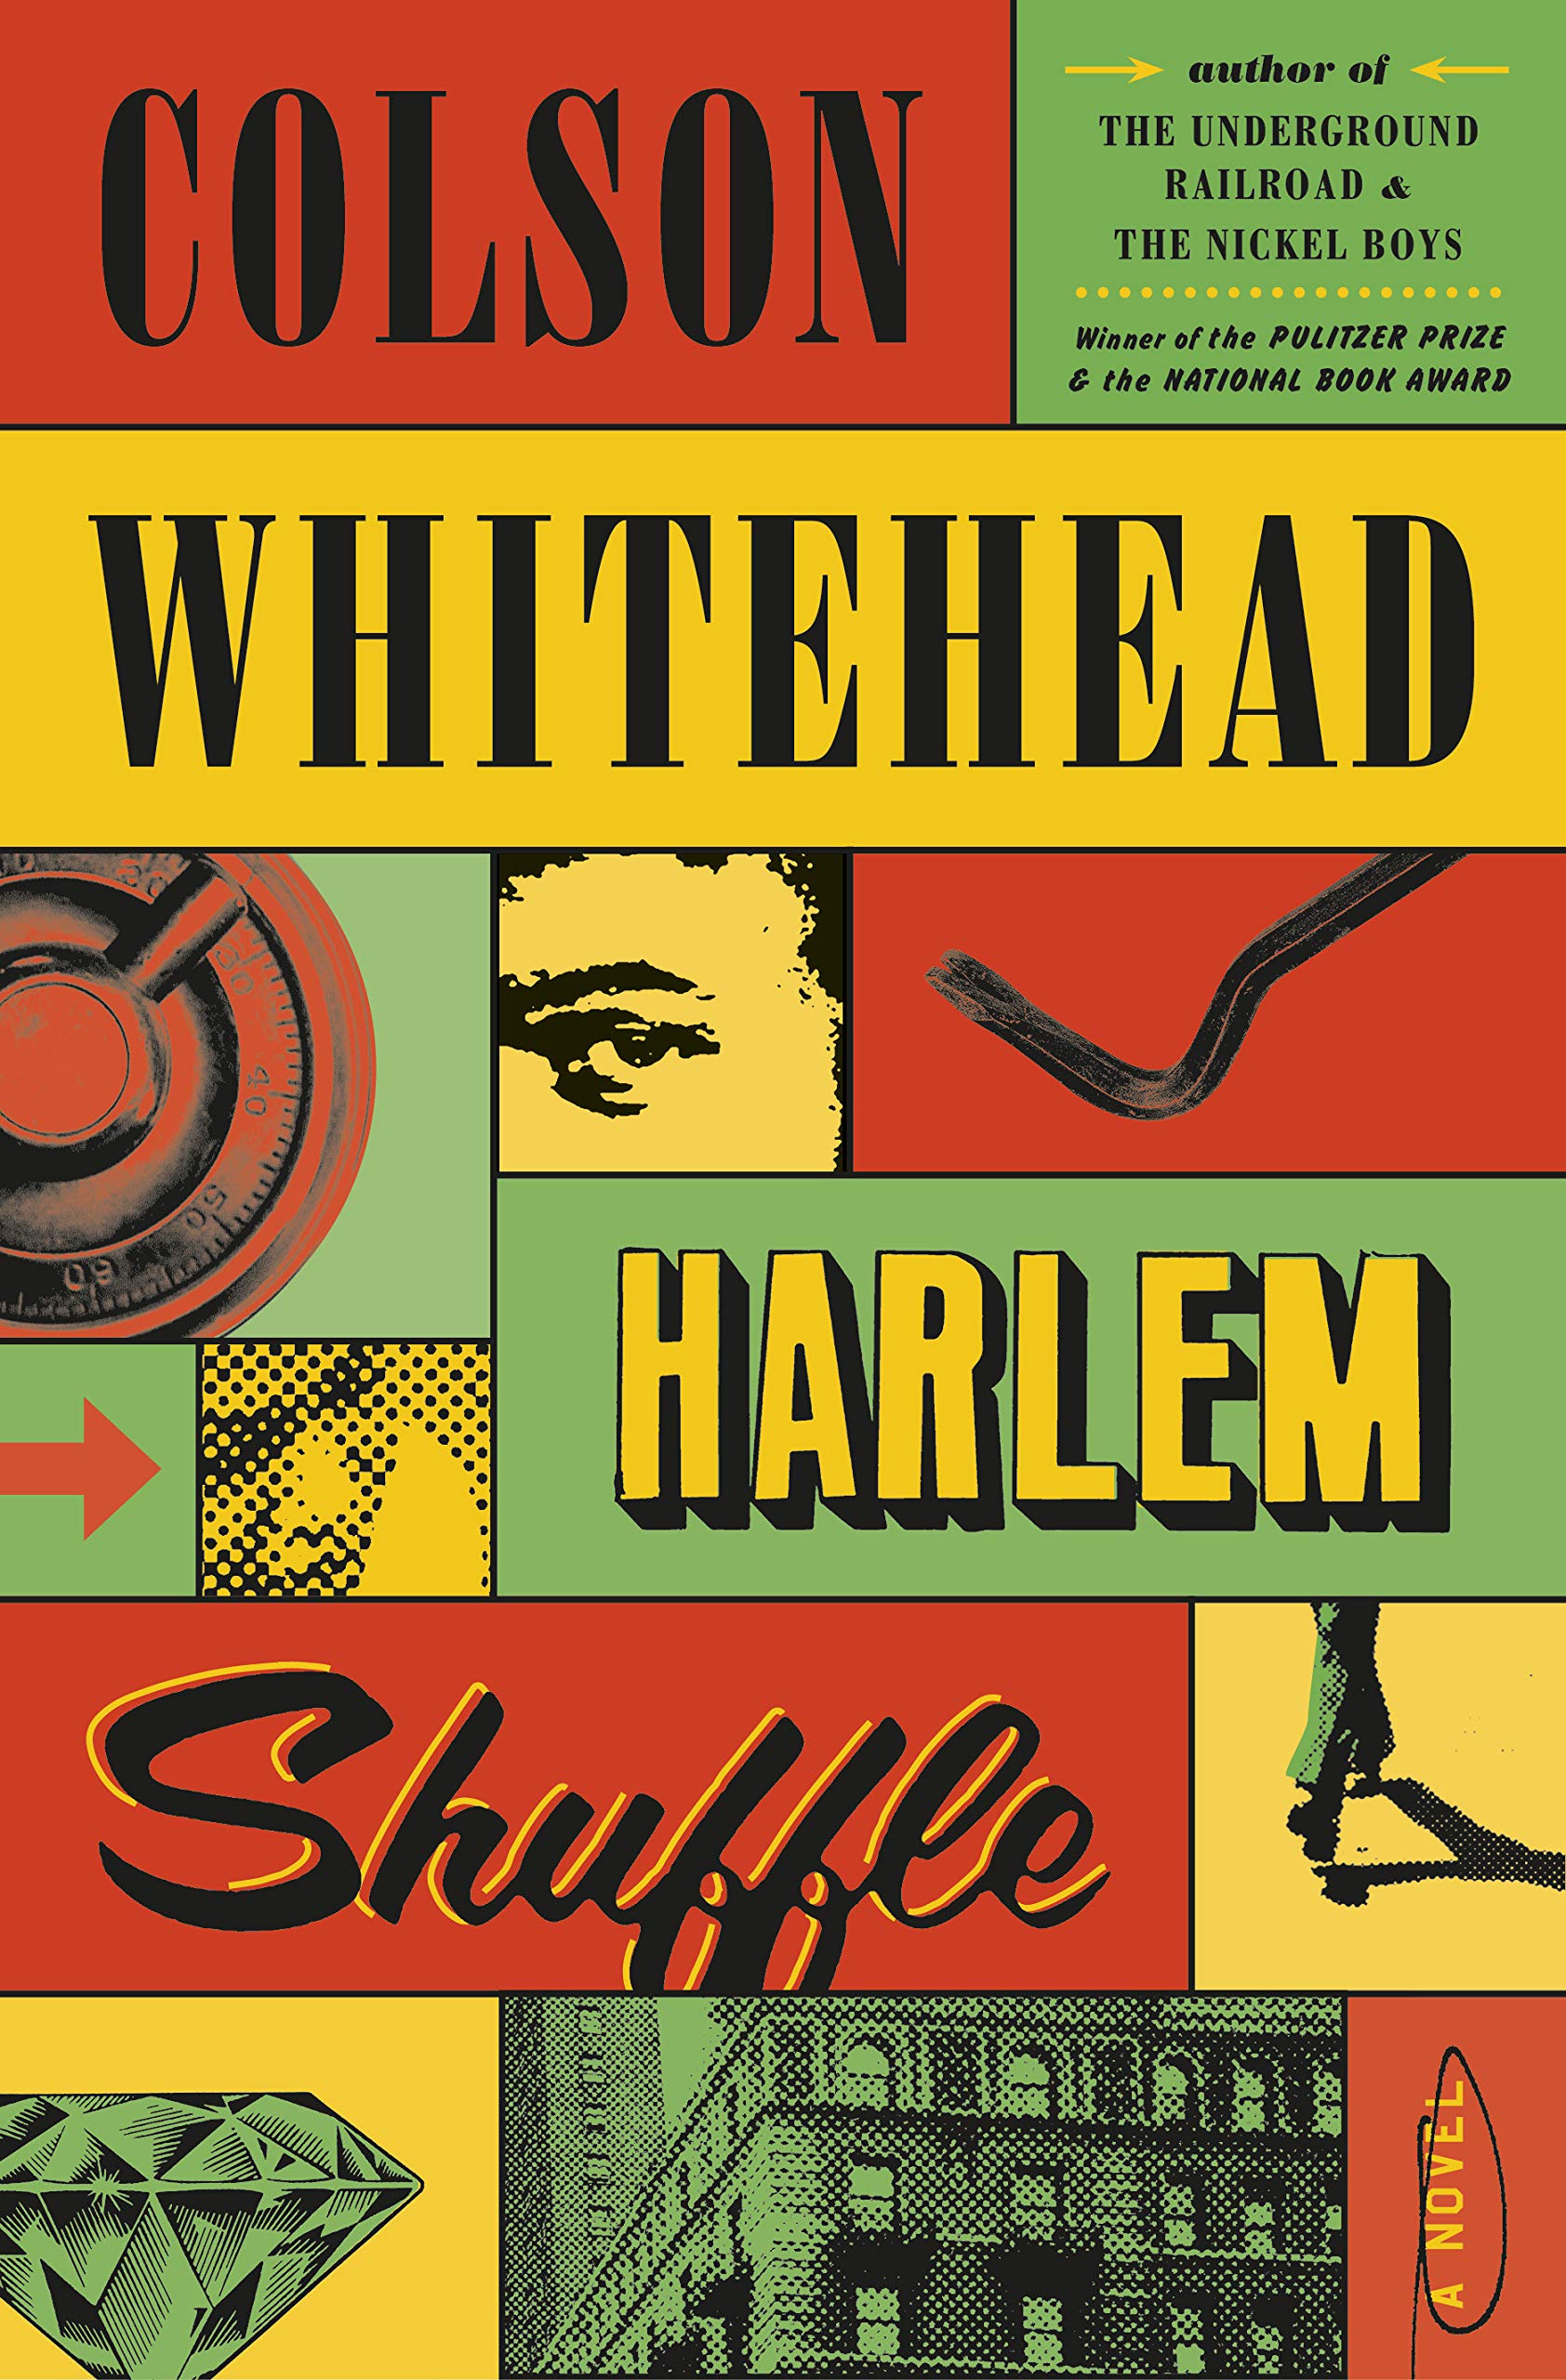 The cover of Harlem Shuffle